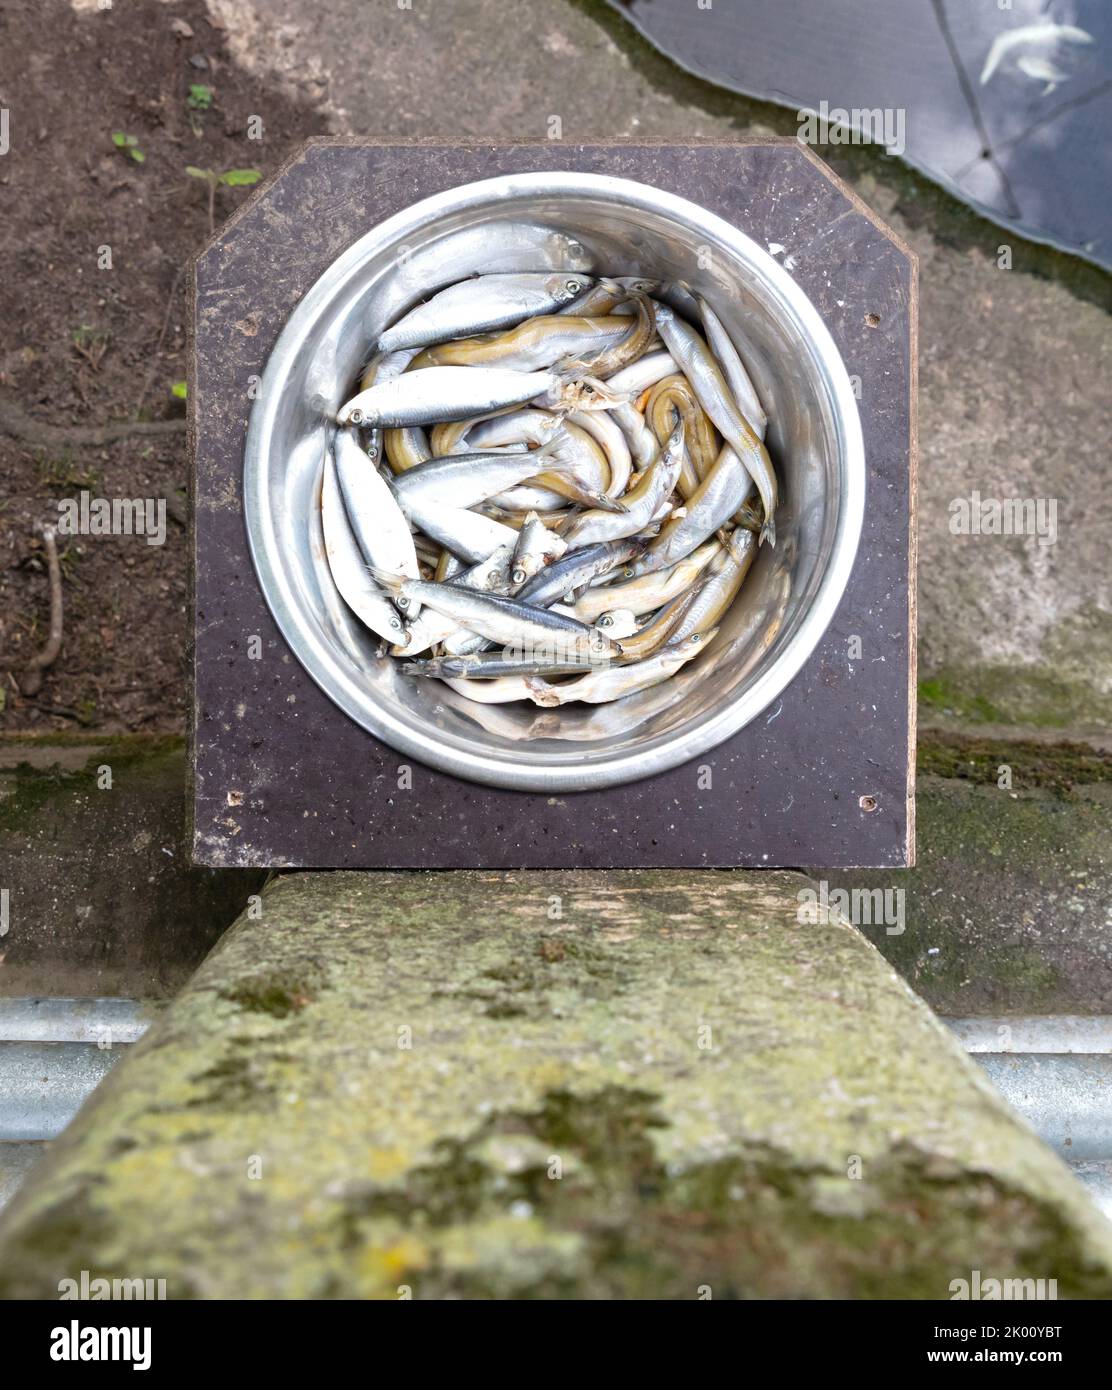 Fish in a metal bowl, ready for feeding other animals Stock Photo